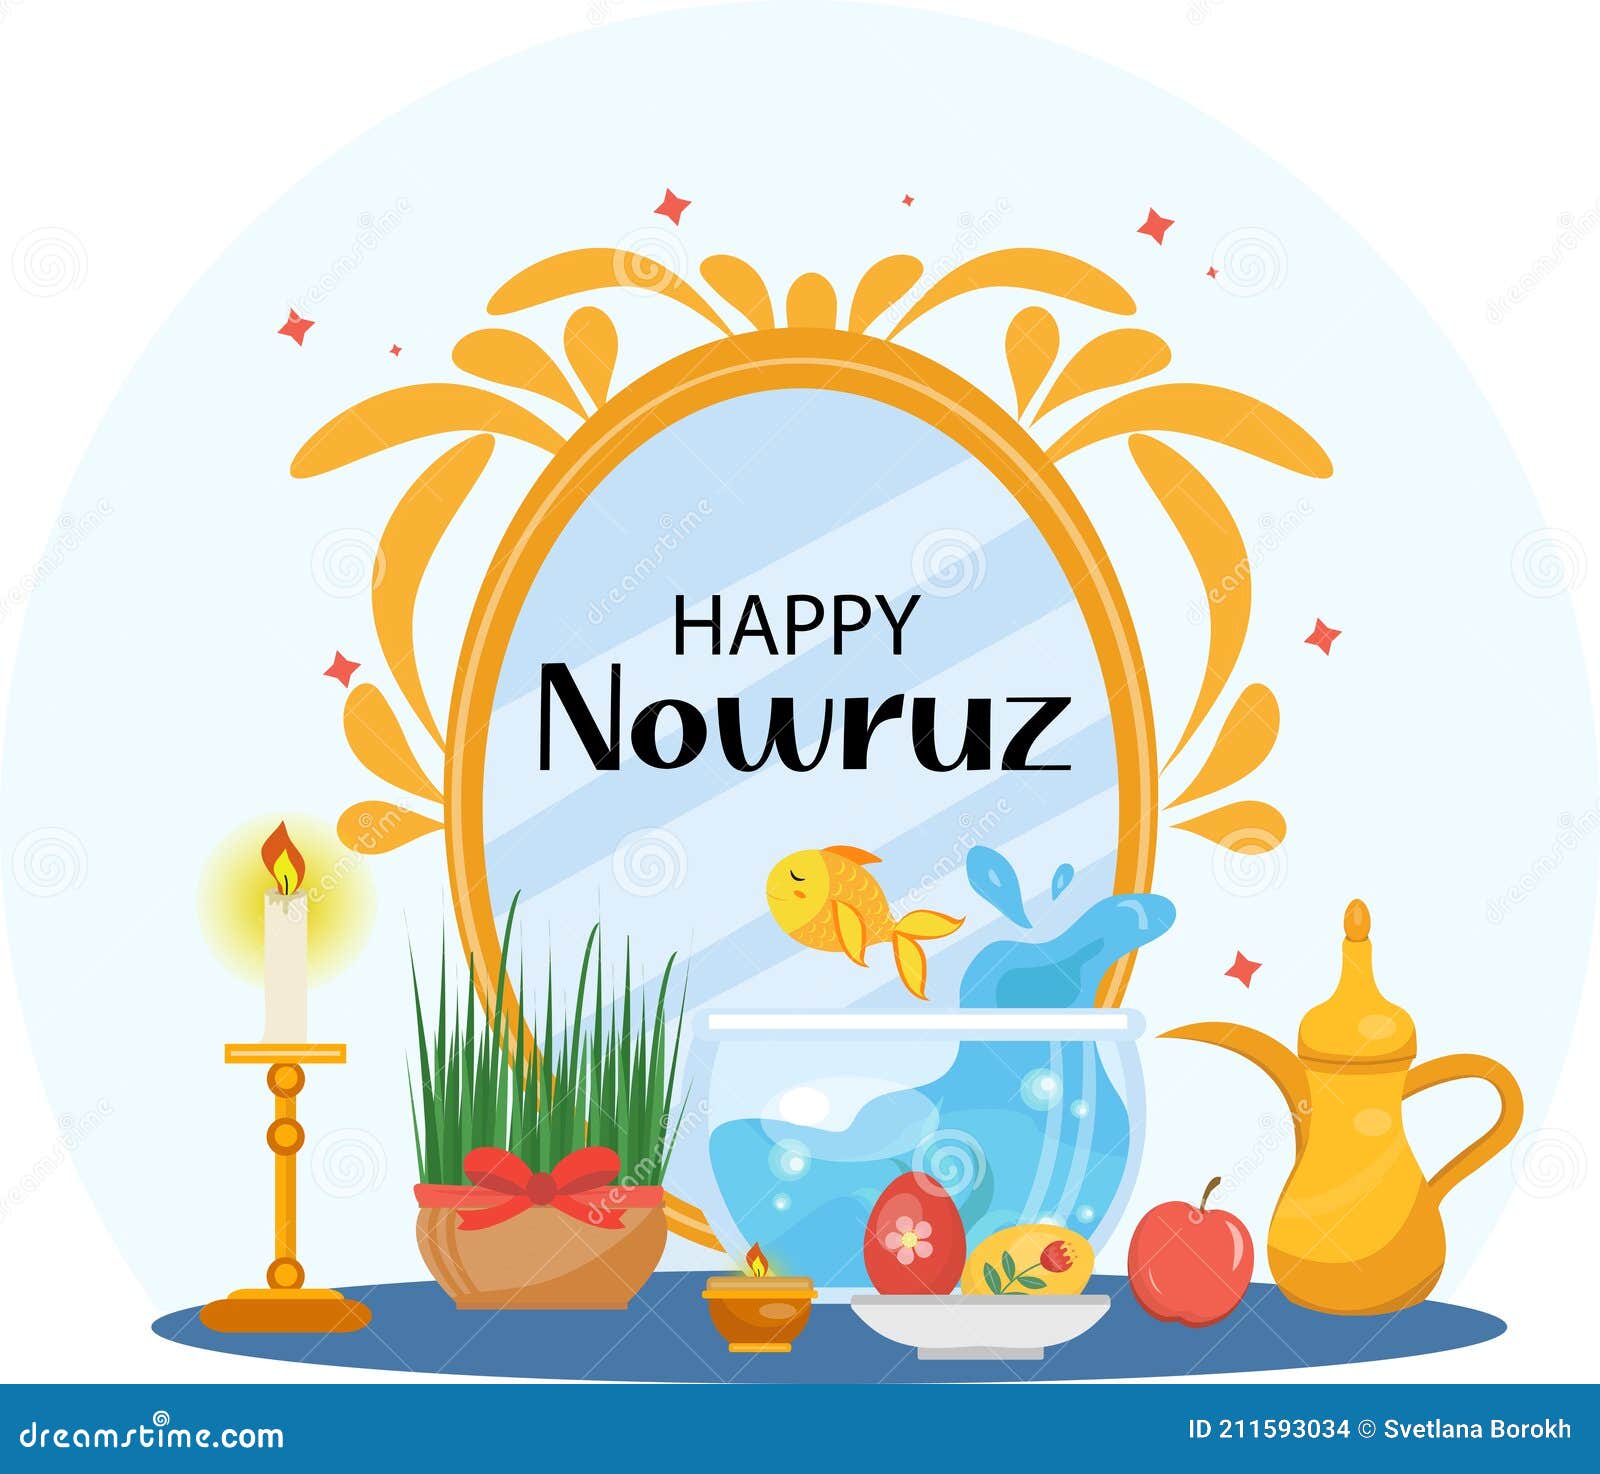 Happy Nowruz Hand Lettering Isolated On White. Iranian Or Persian New